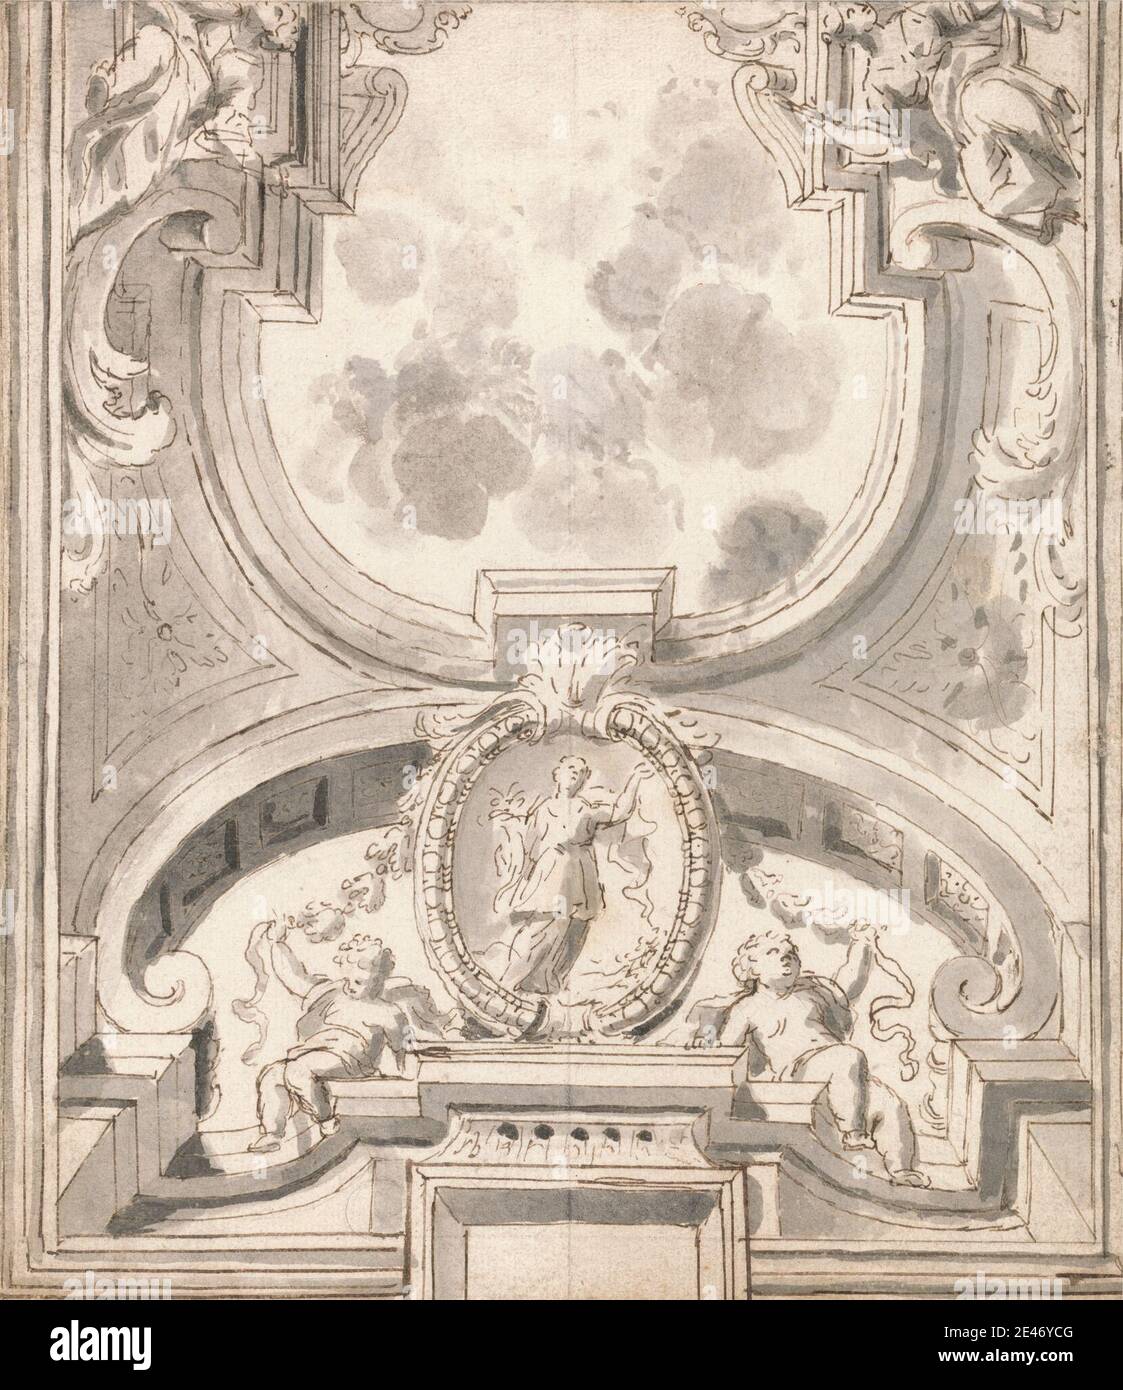 Attributed to Thomas Carwitham, active 1723, British, Design for Ceiling Decoration, undated. Graphite, gray wash, and pen and brown ink on medium, moderately textured, cream wove paper.   ceilings , garlands , putti , women Stock Photo